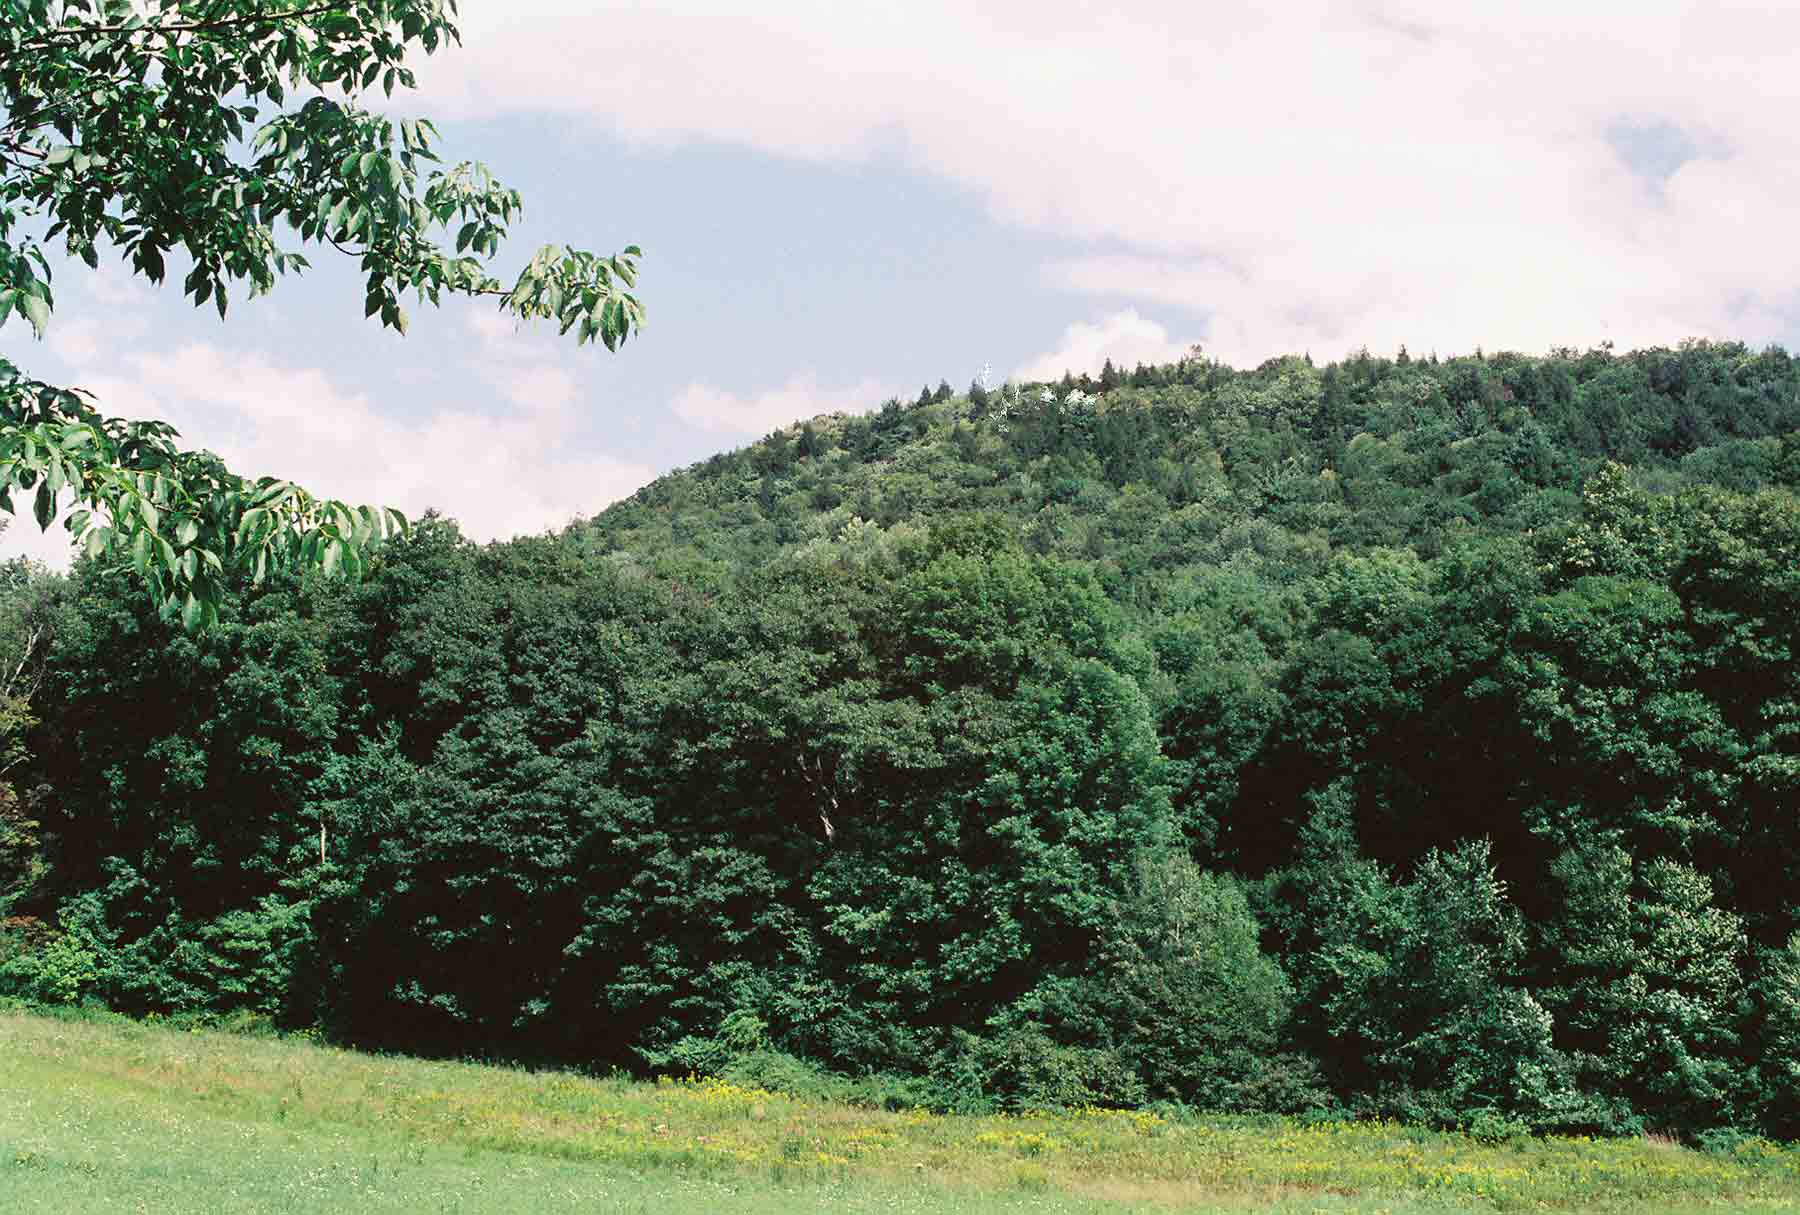 mm 1.0 - View of Barrack Matiff (spelling correct) from the field just south of where the southbound trail leaves US 44 near Salisbury. The trail climbs this hill.  Courtesy dlcul@conncoll.edu